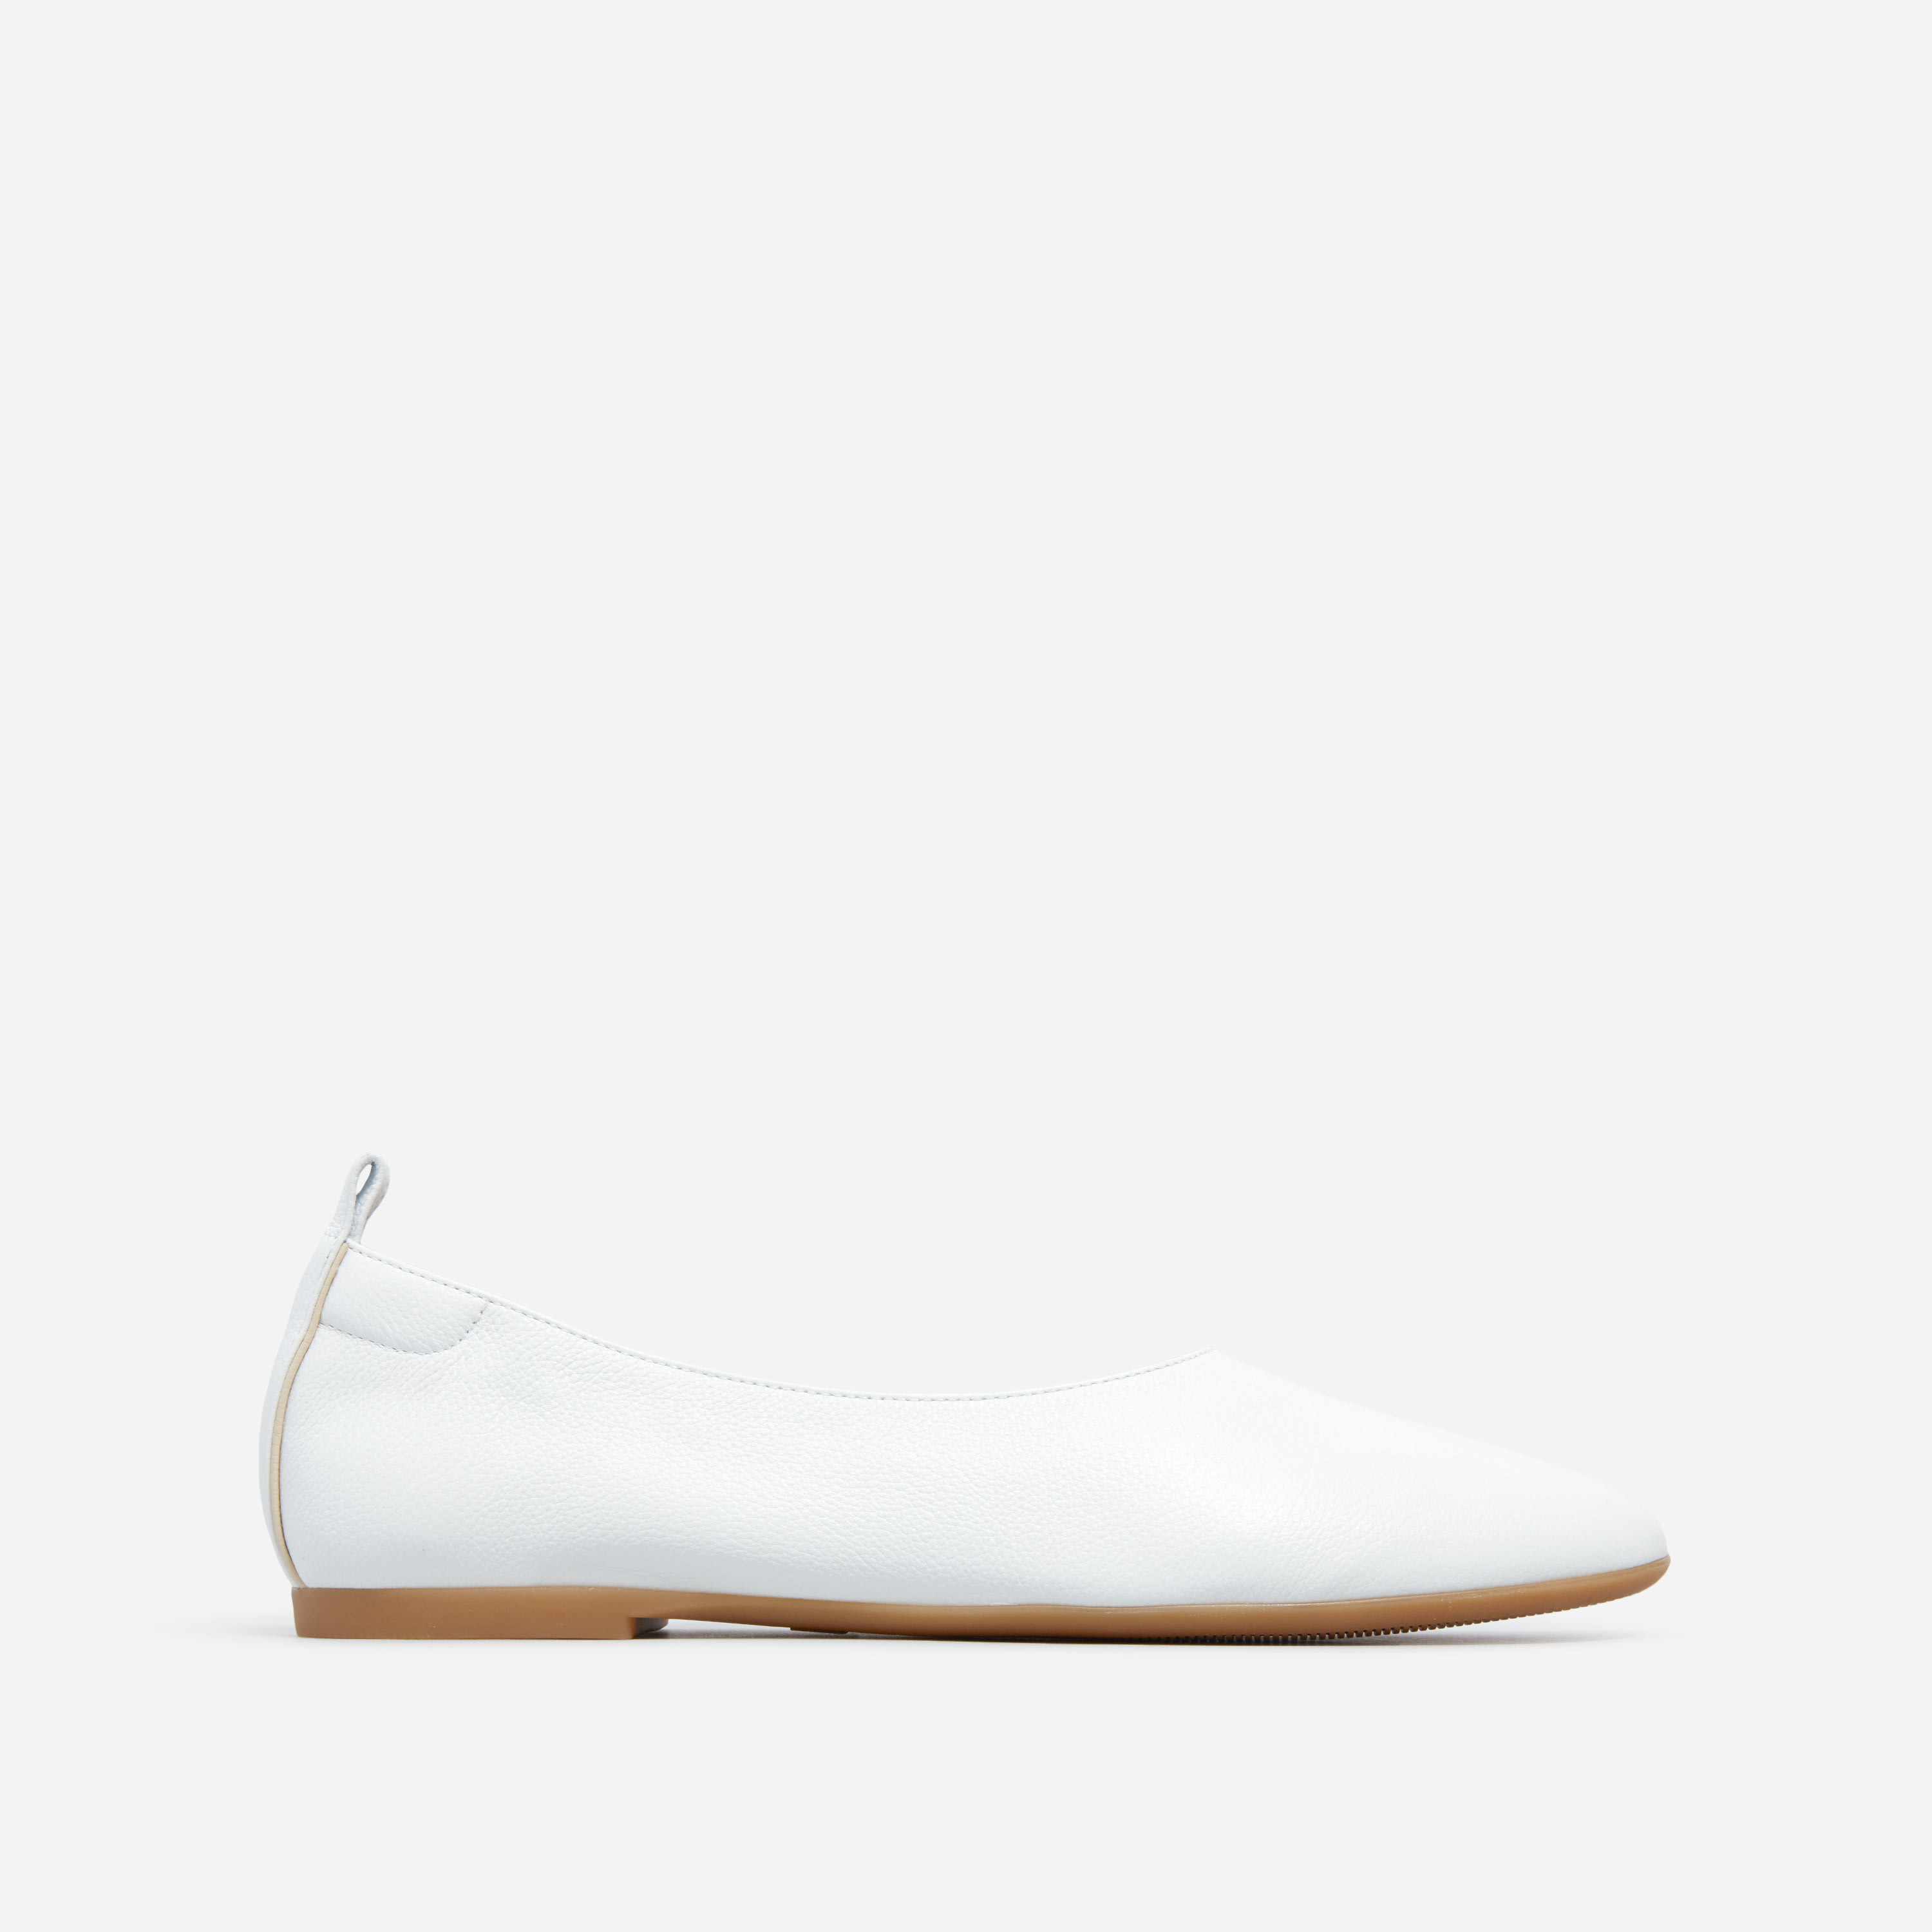 The Day Glove in Narrow Fit White – Everlane